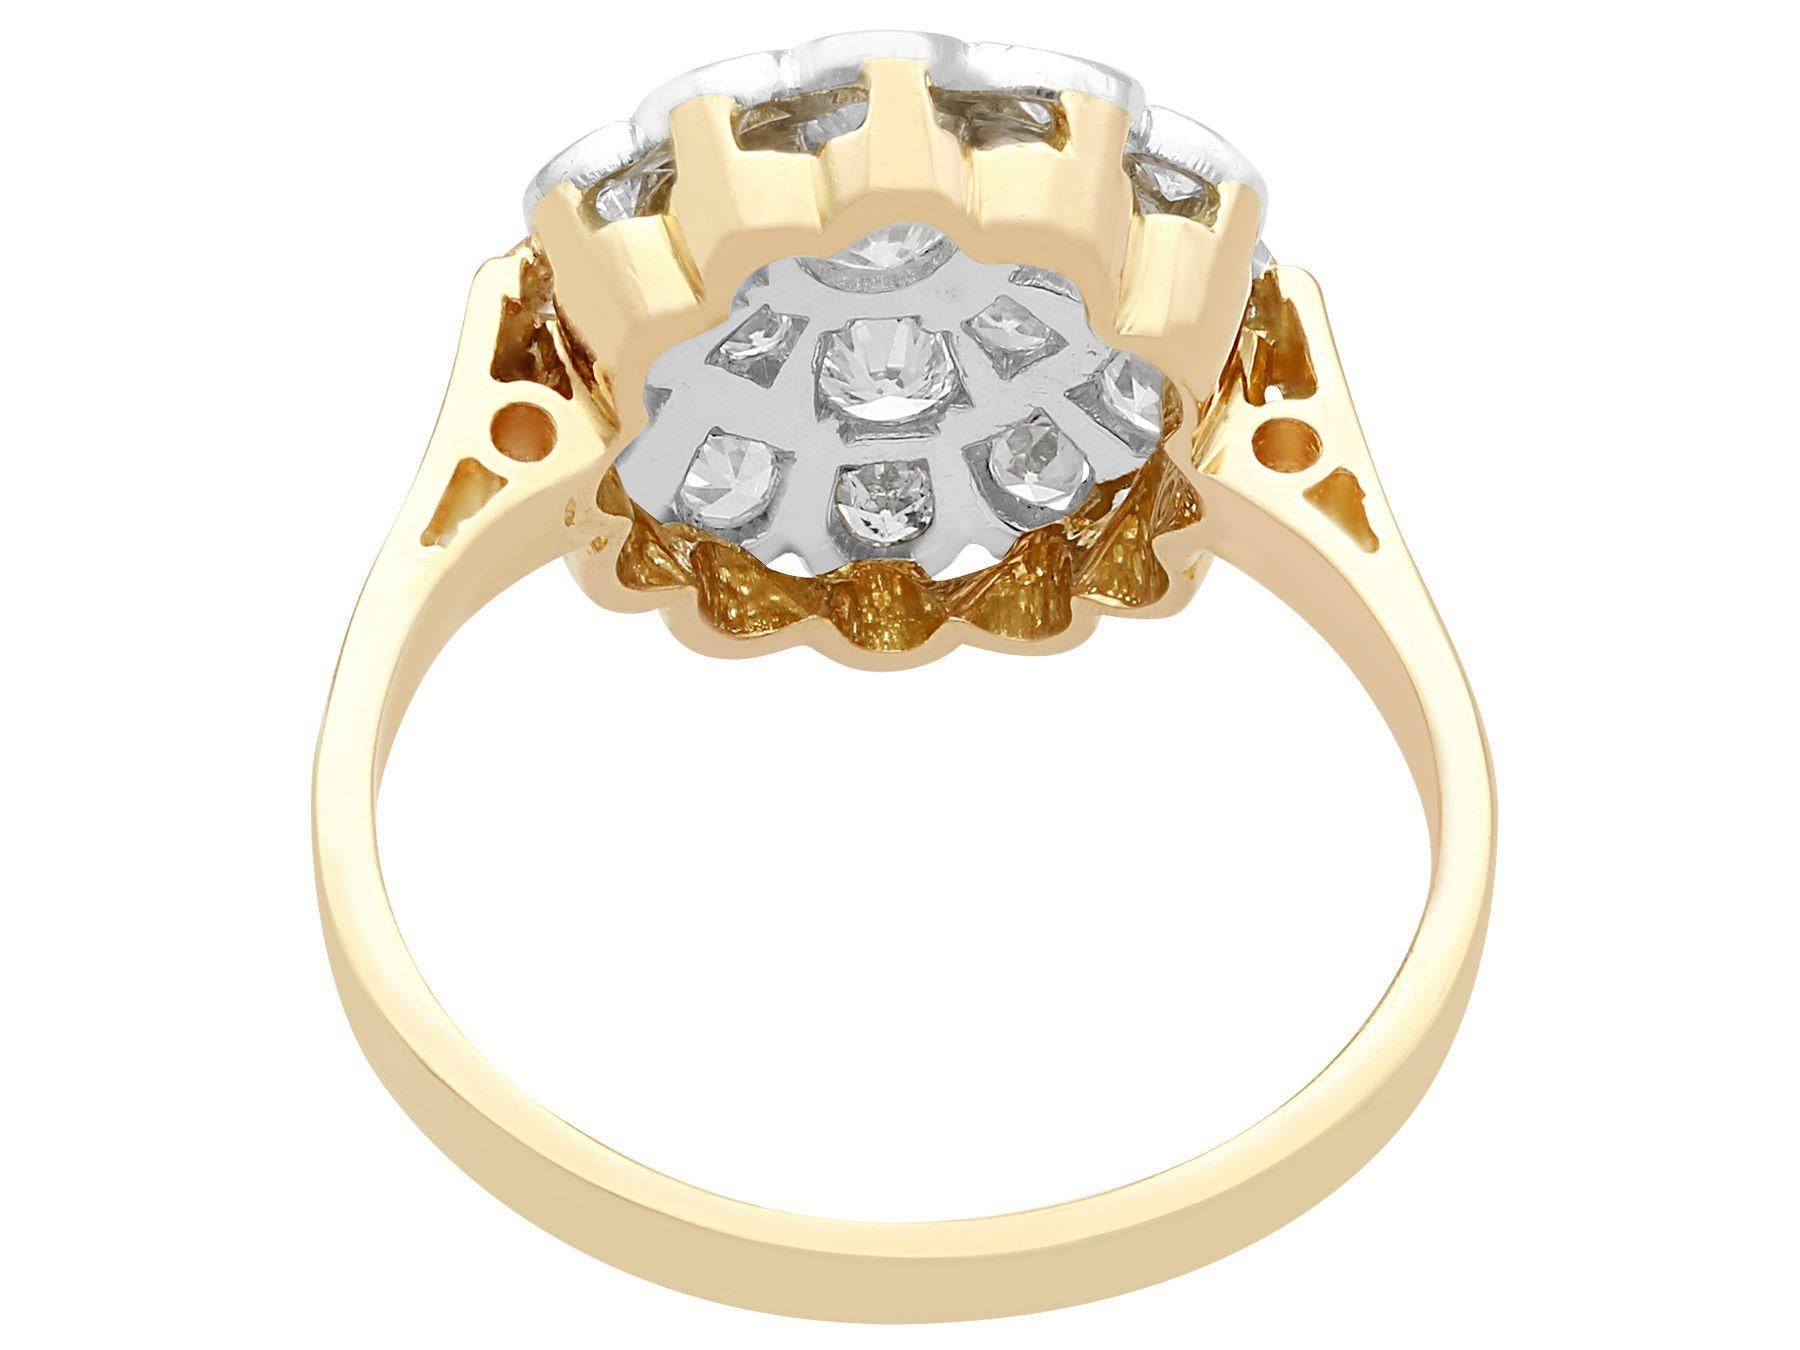 1930s Antique Diamond and Yellow Gold Cluster Ring In Excellent Condition For Sale In Jesmond, Newcastle Upon Tyne